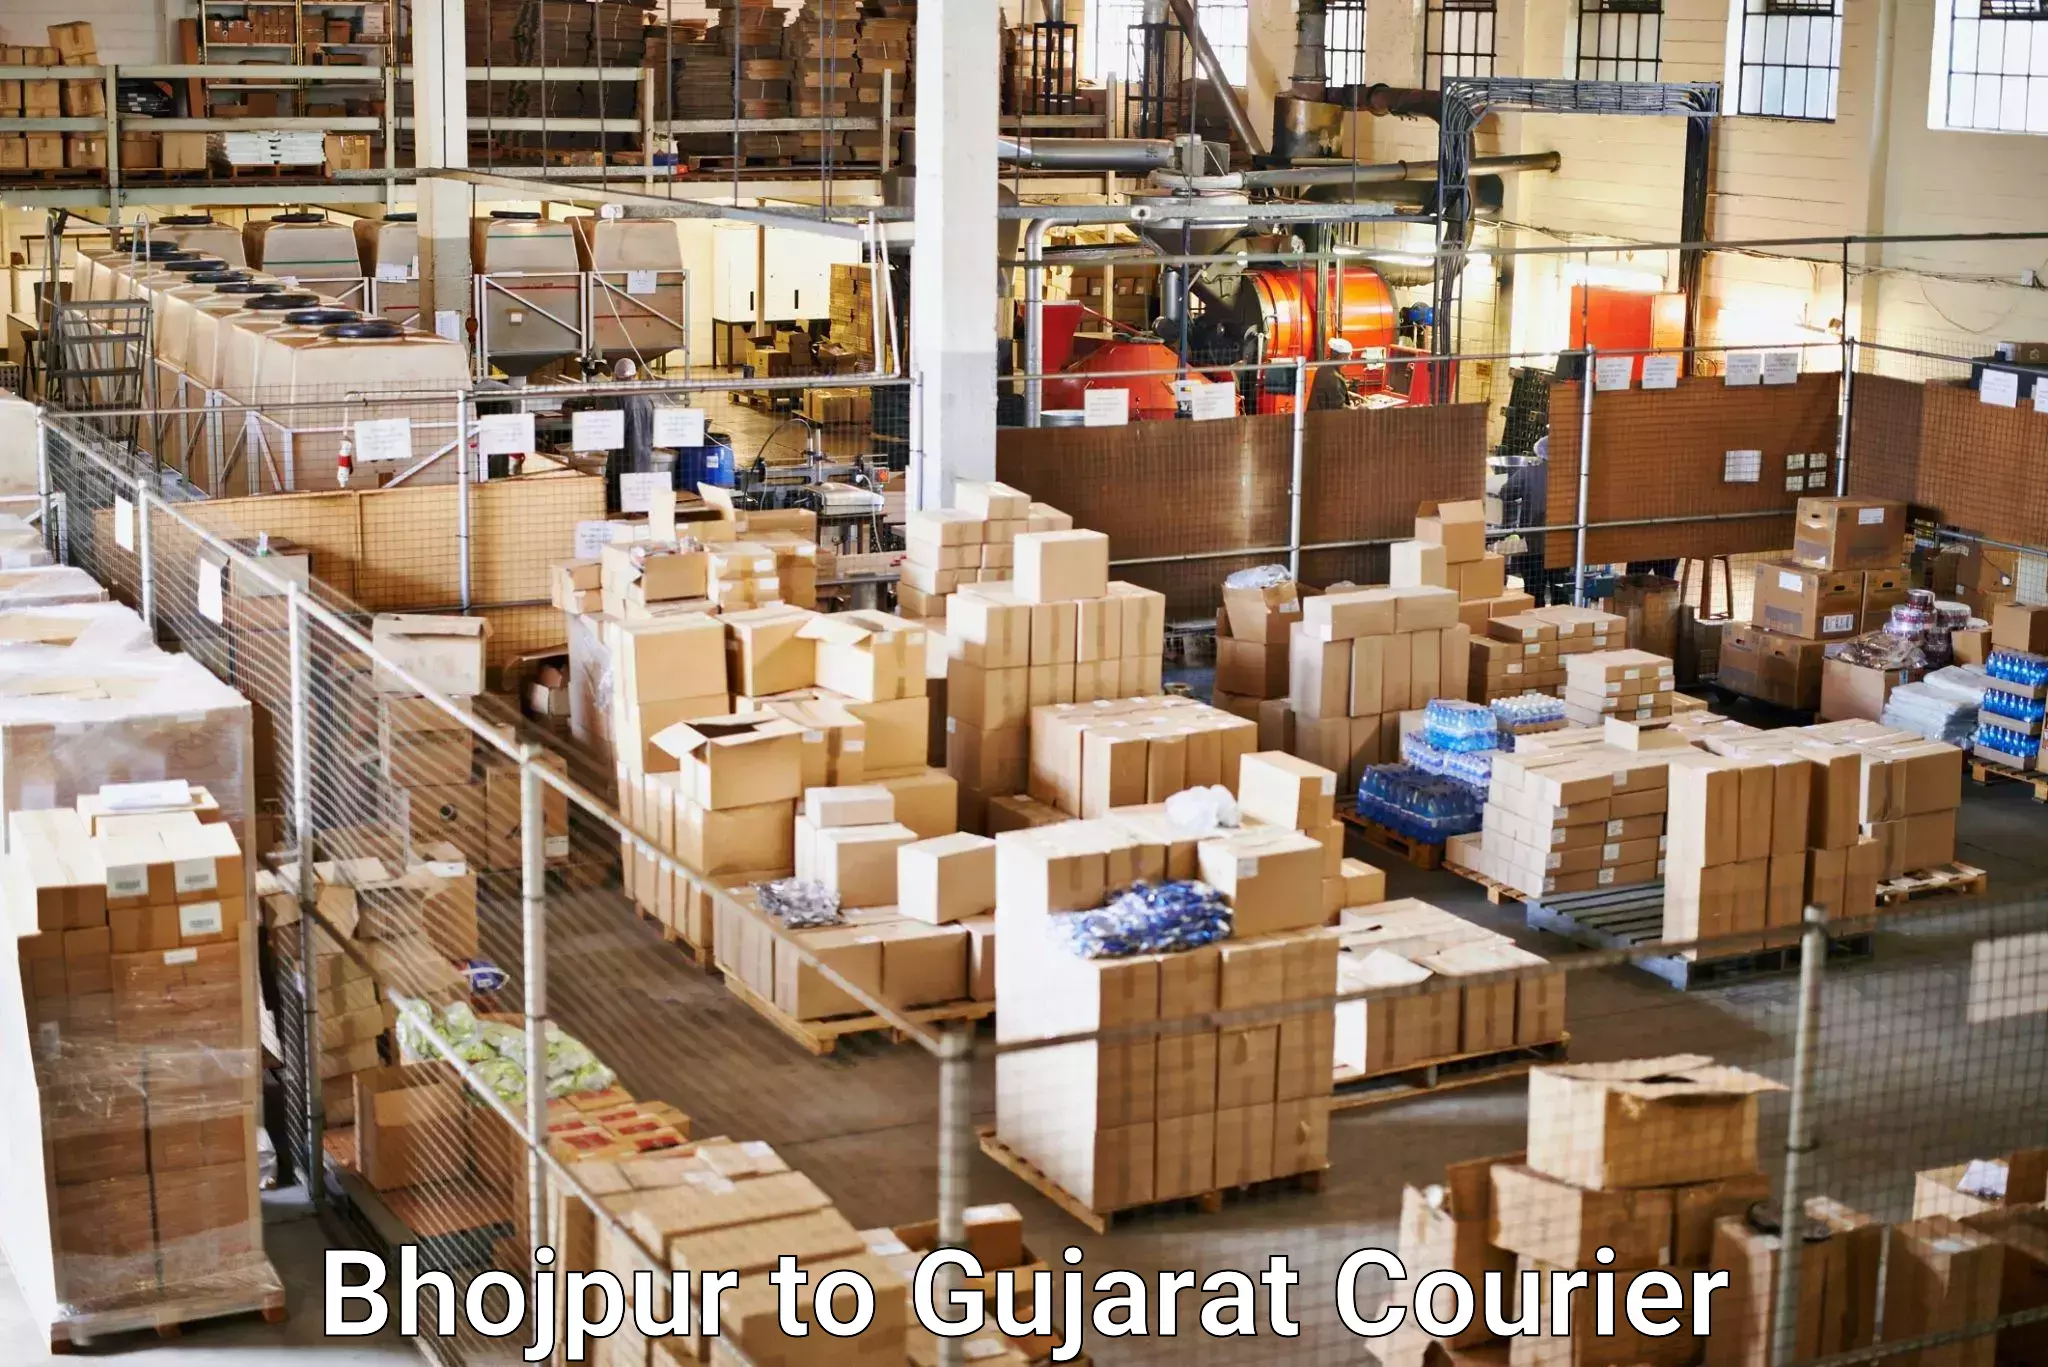 Reliable courier services Bhojpur to Ahmedabad